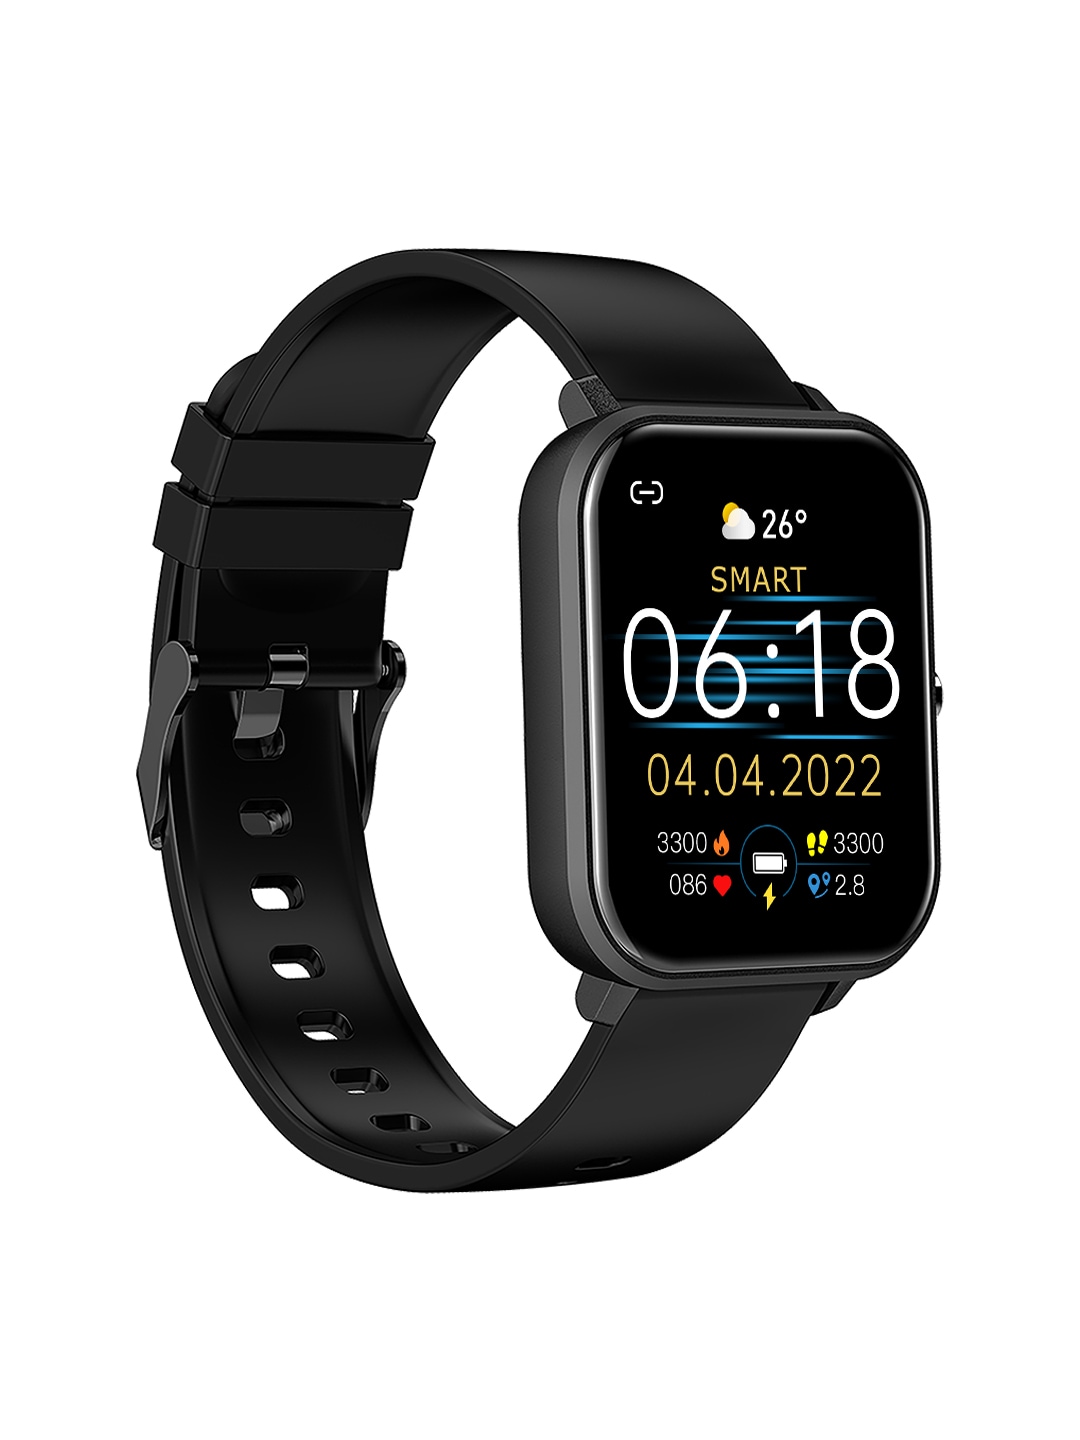 pTron Pulsefit Pro Bluetooth Calling Smartwatch with 1.69" Full Touch Screen - Black Price in India